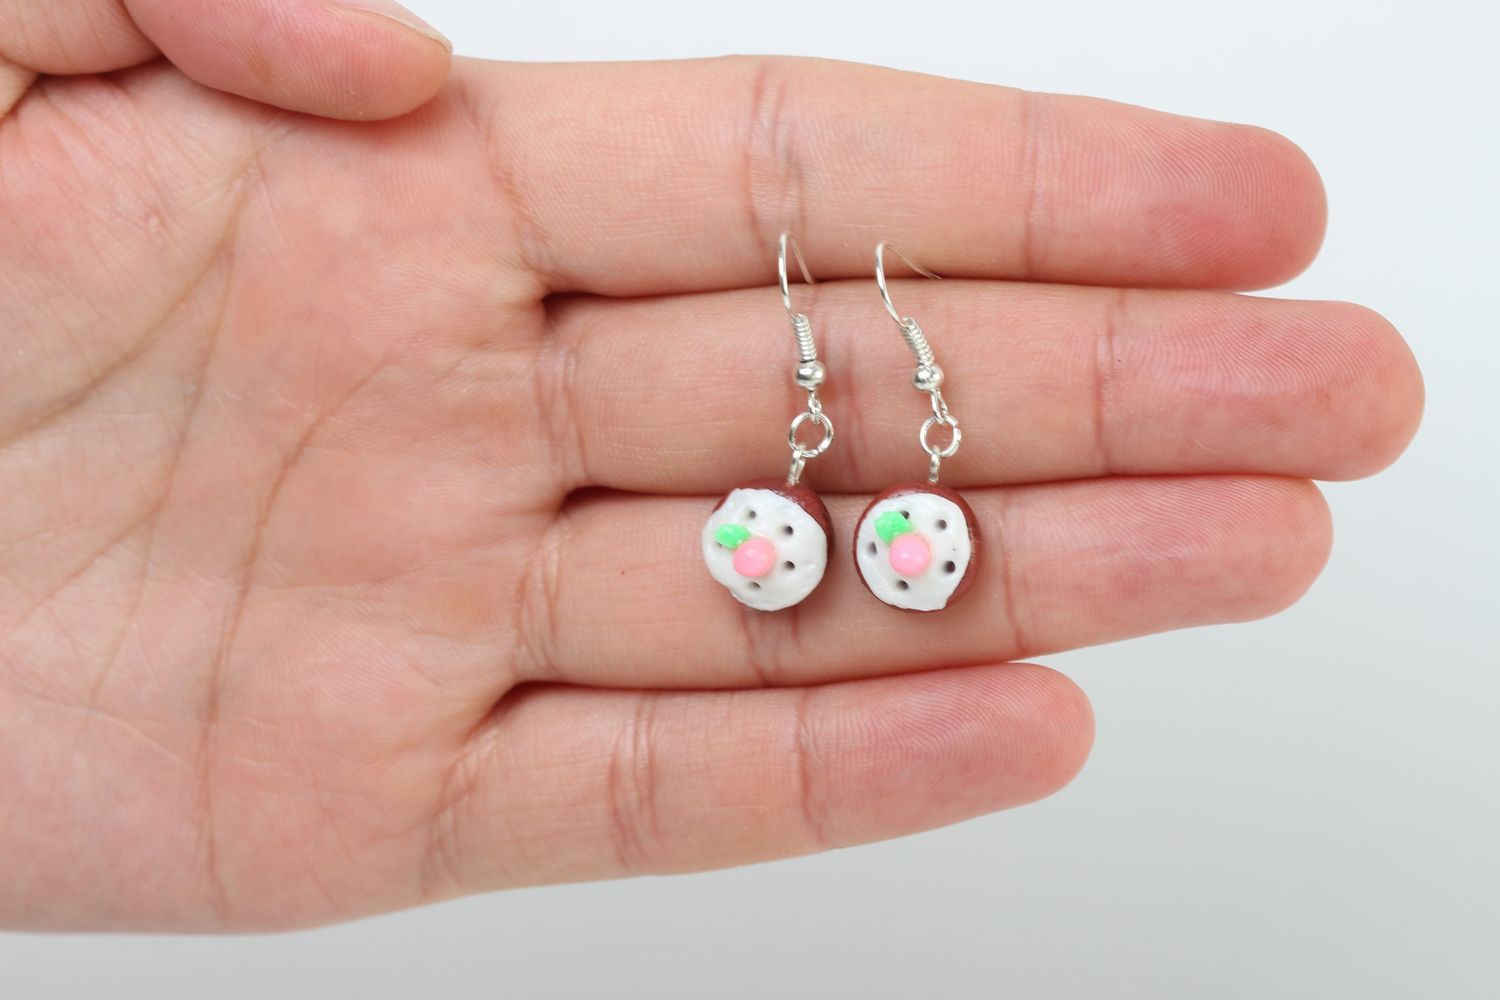 Stylish polymer clay earrings with charms handmade accessories for stylish girl photo 5